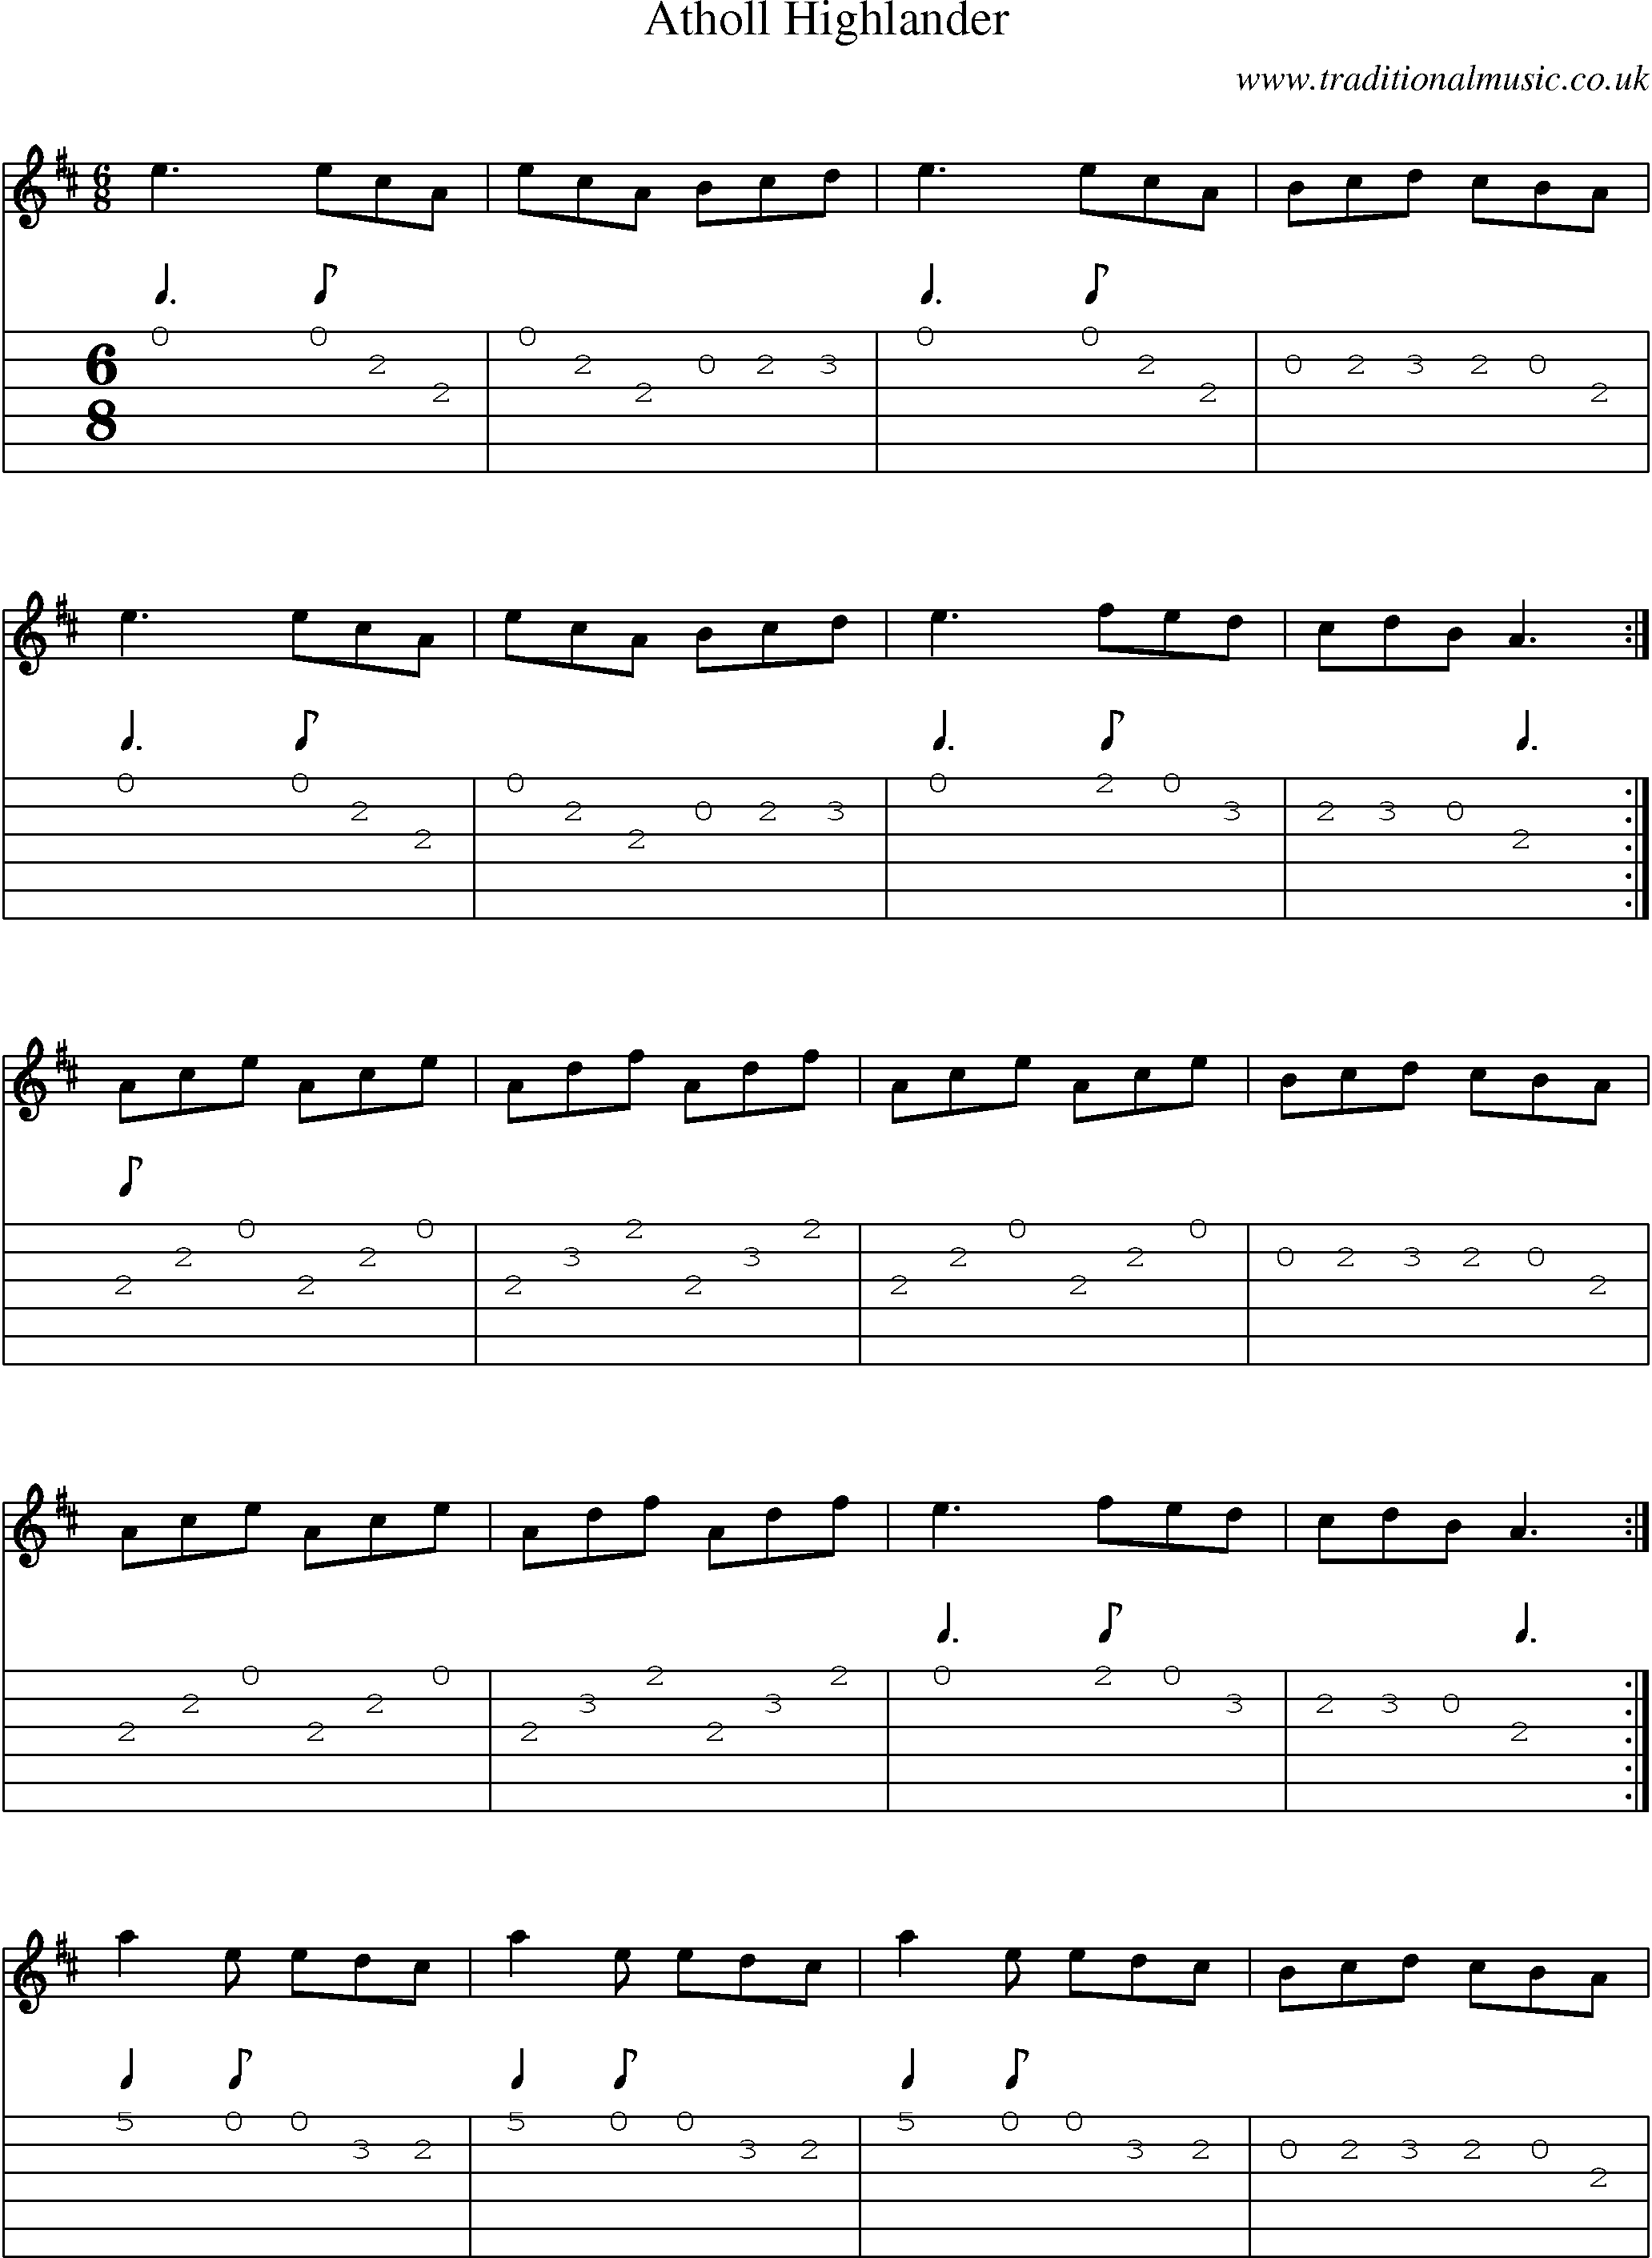 Music Score and Guitar Tabs for Atholl Highlander